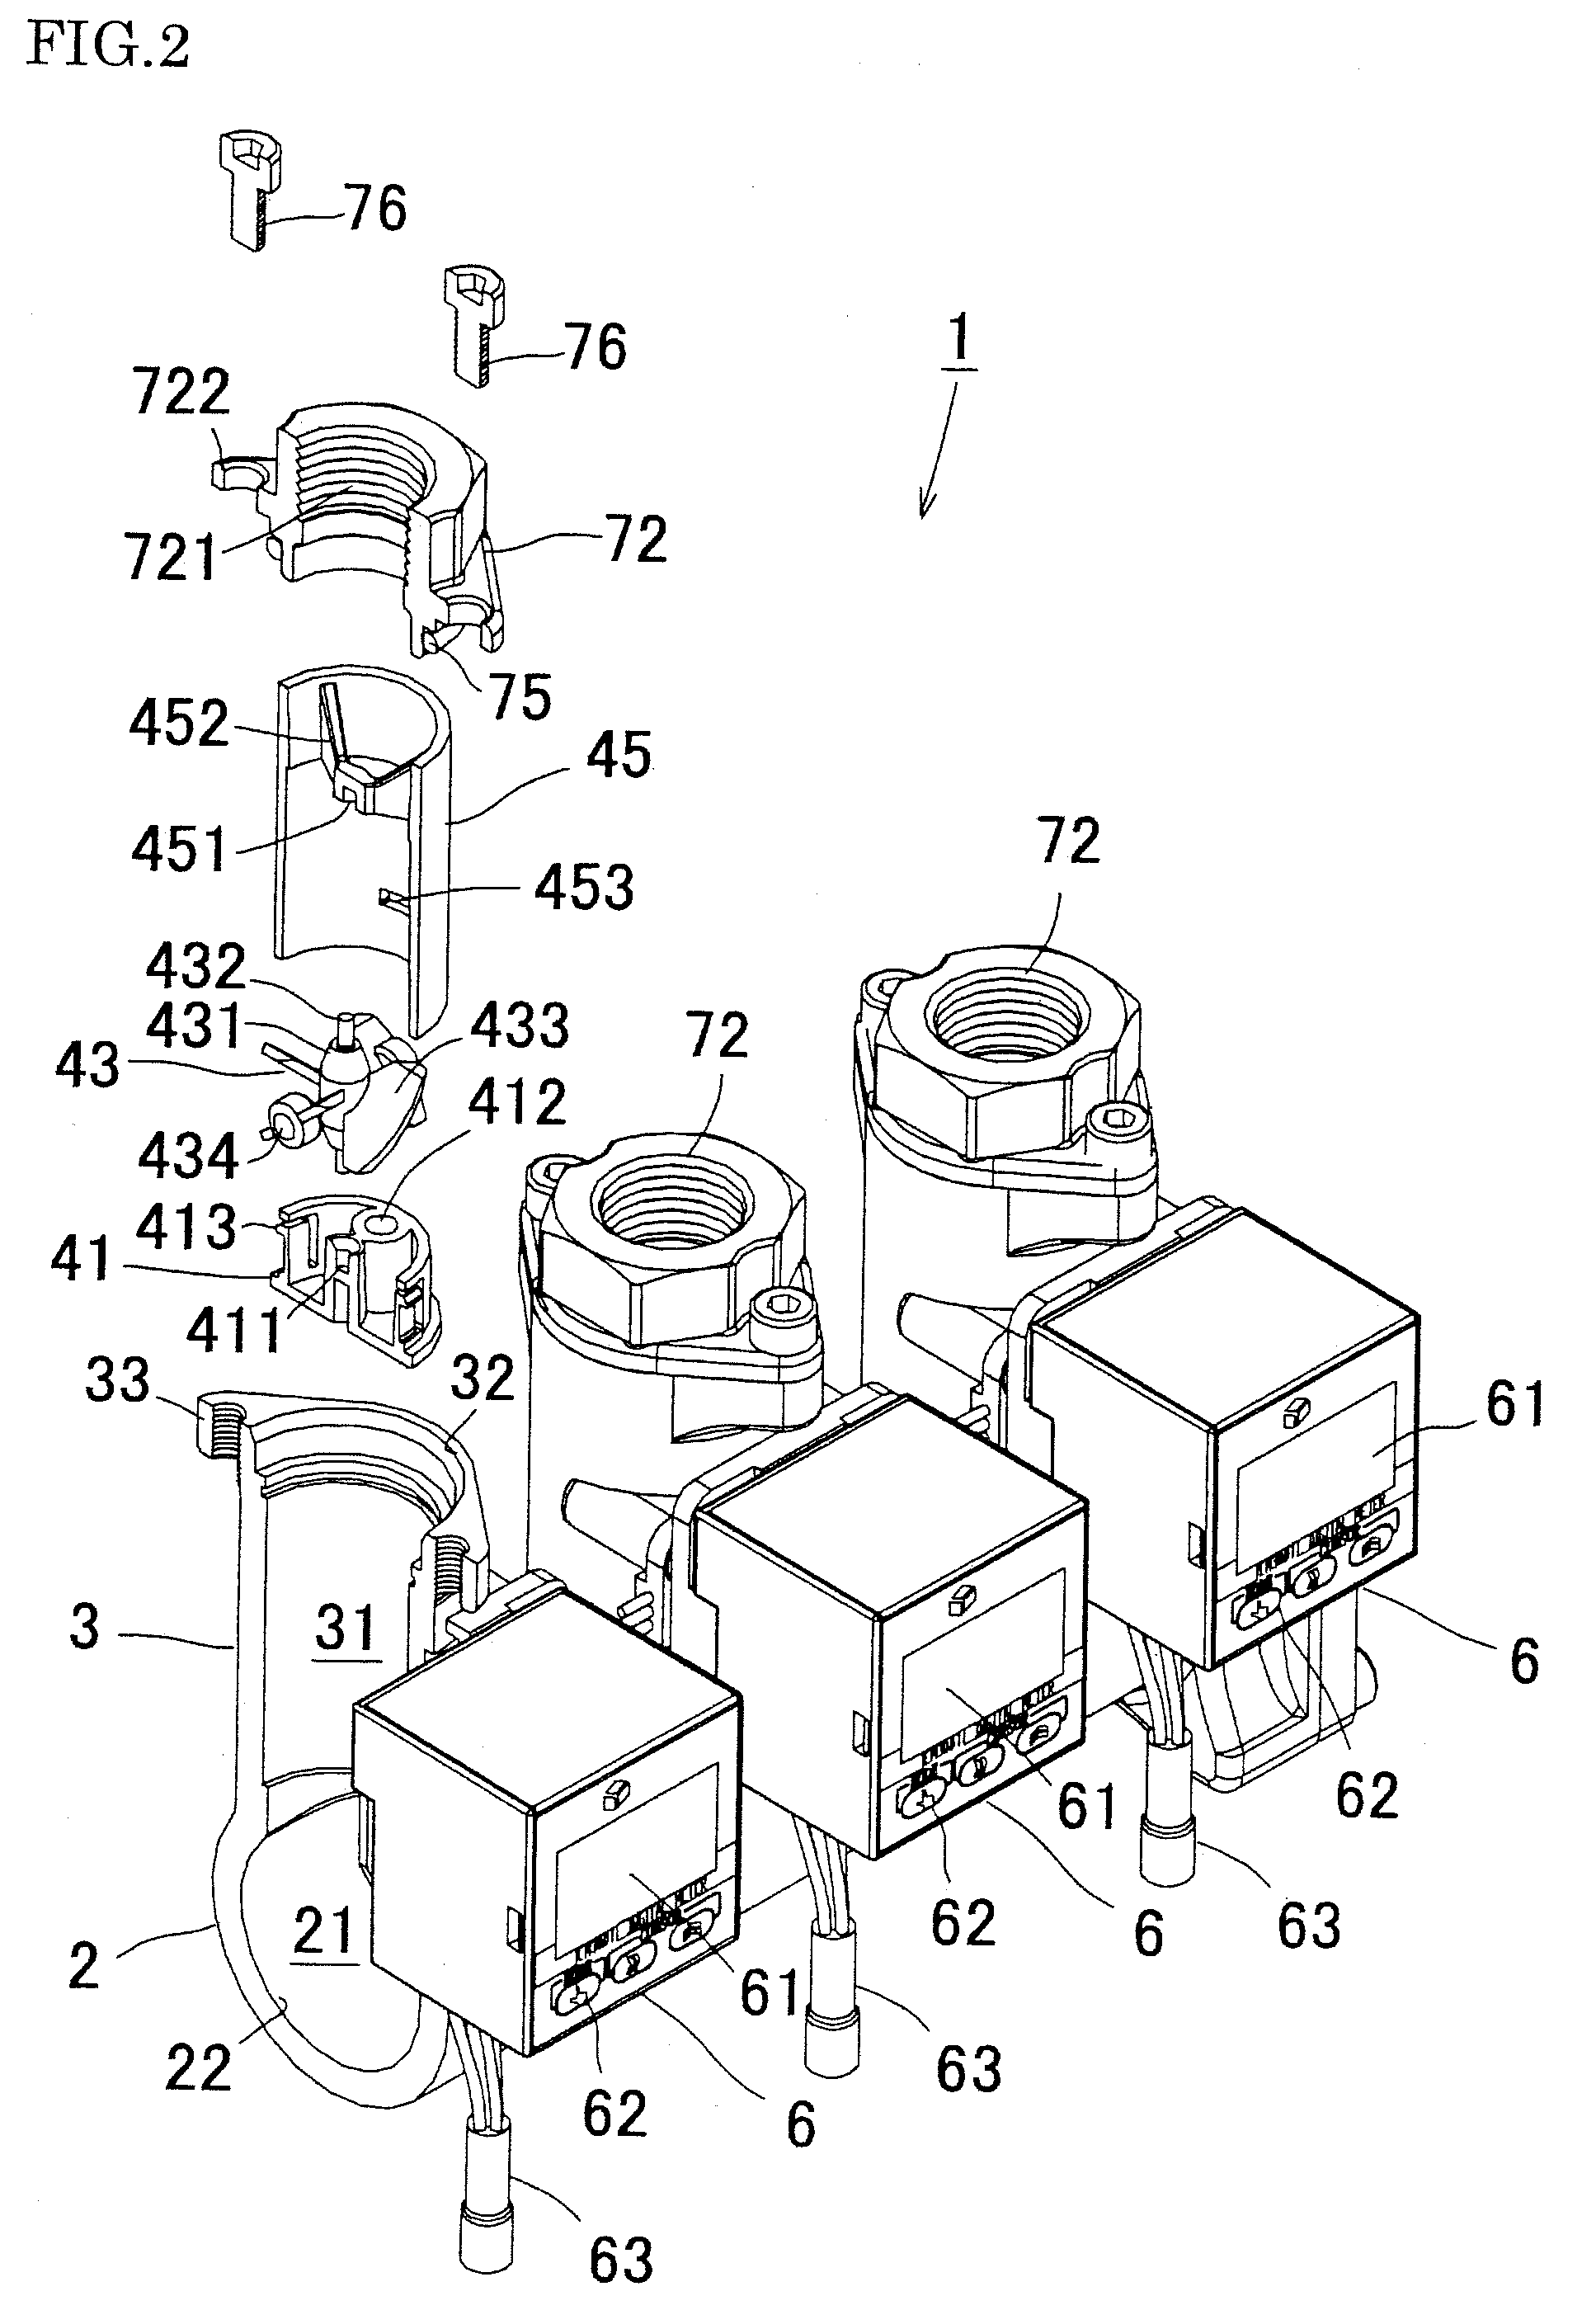 Pipe assembly unit with built-in flow sensors